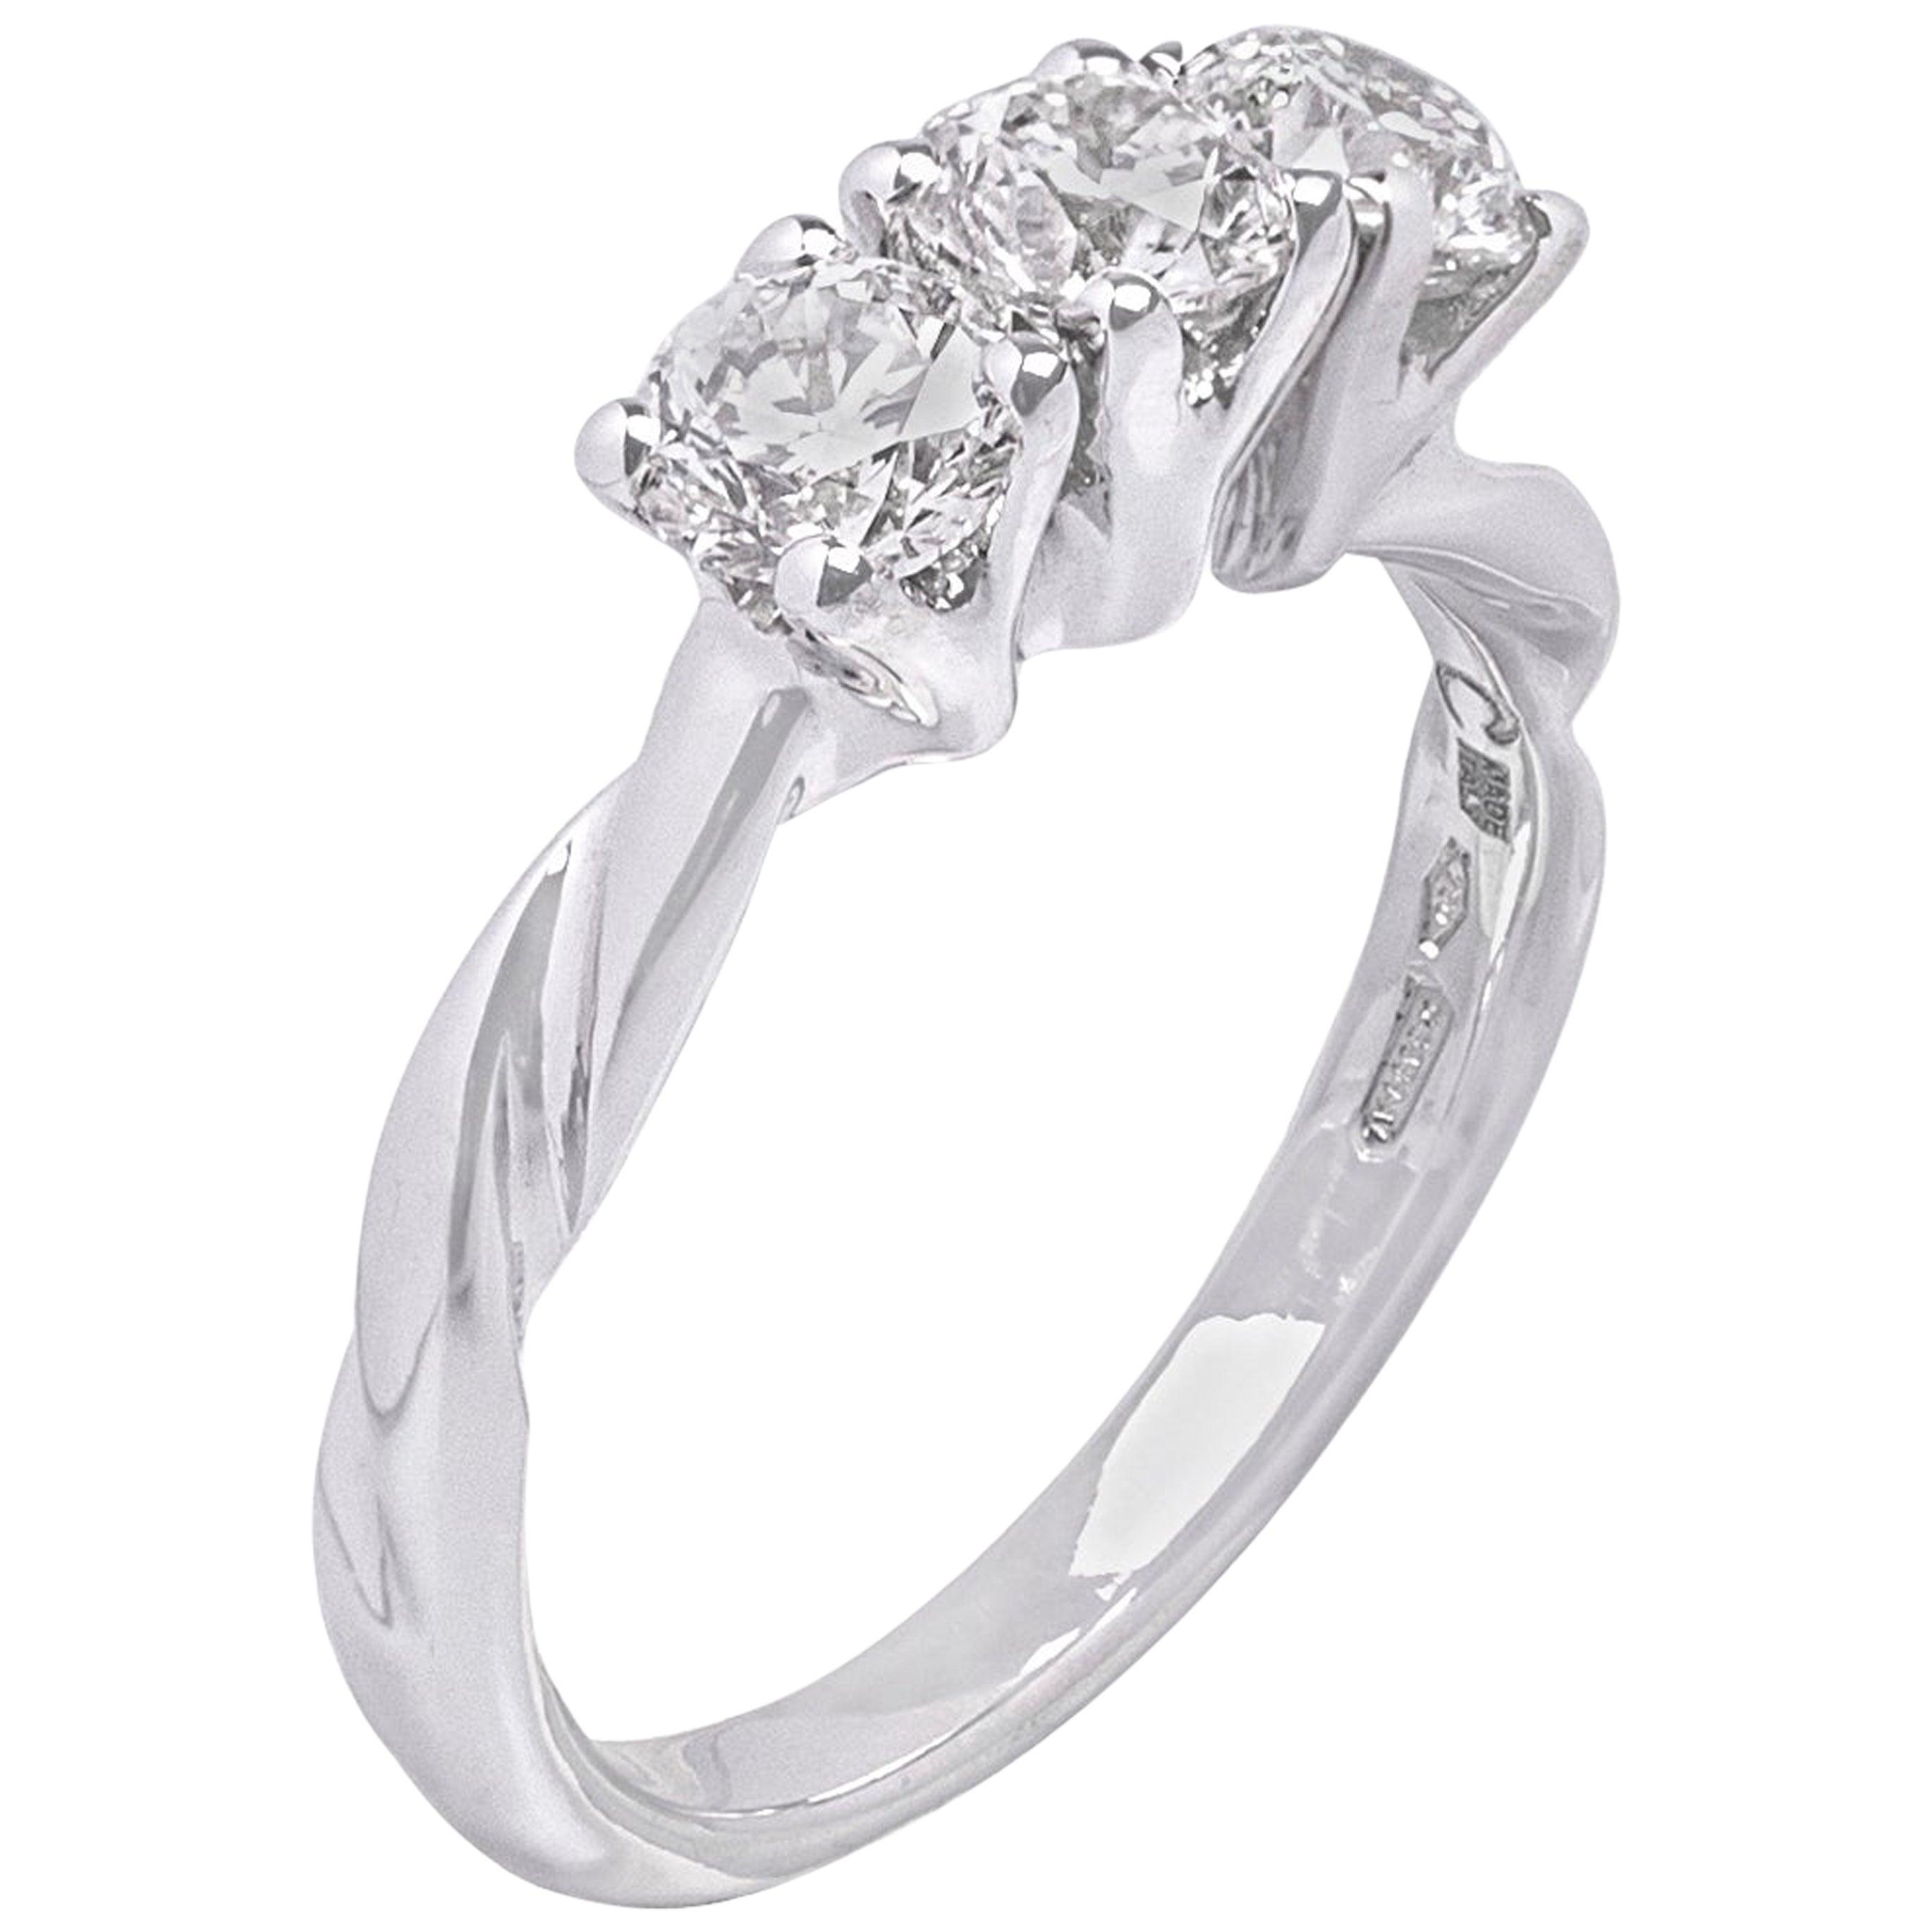 For Sale:  1.28ct Brilliant Cut Diamonds and 18k White Gold Trilogy Ring